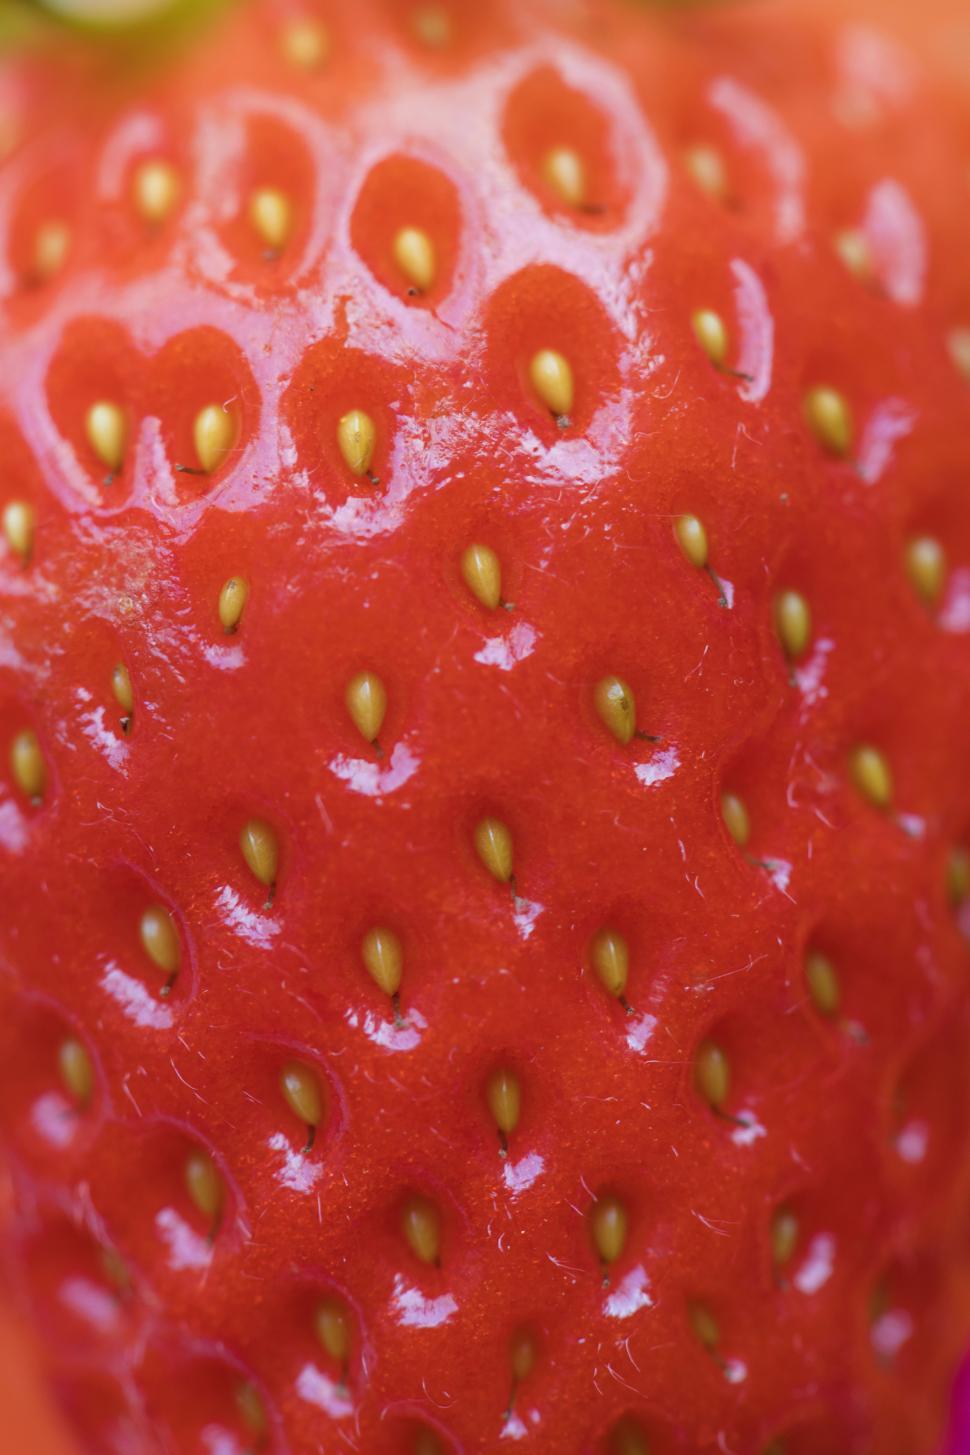 Download Free Stock Photo of Close up of a strawberry 